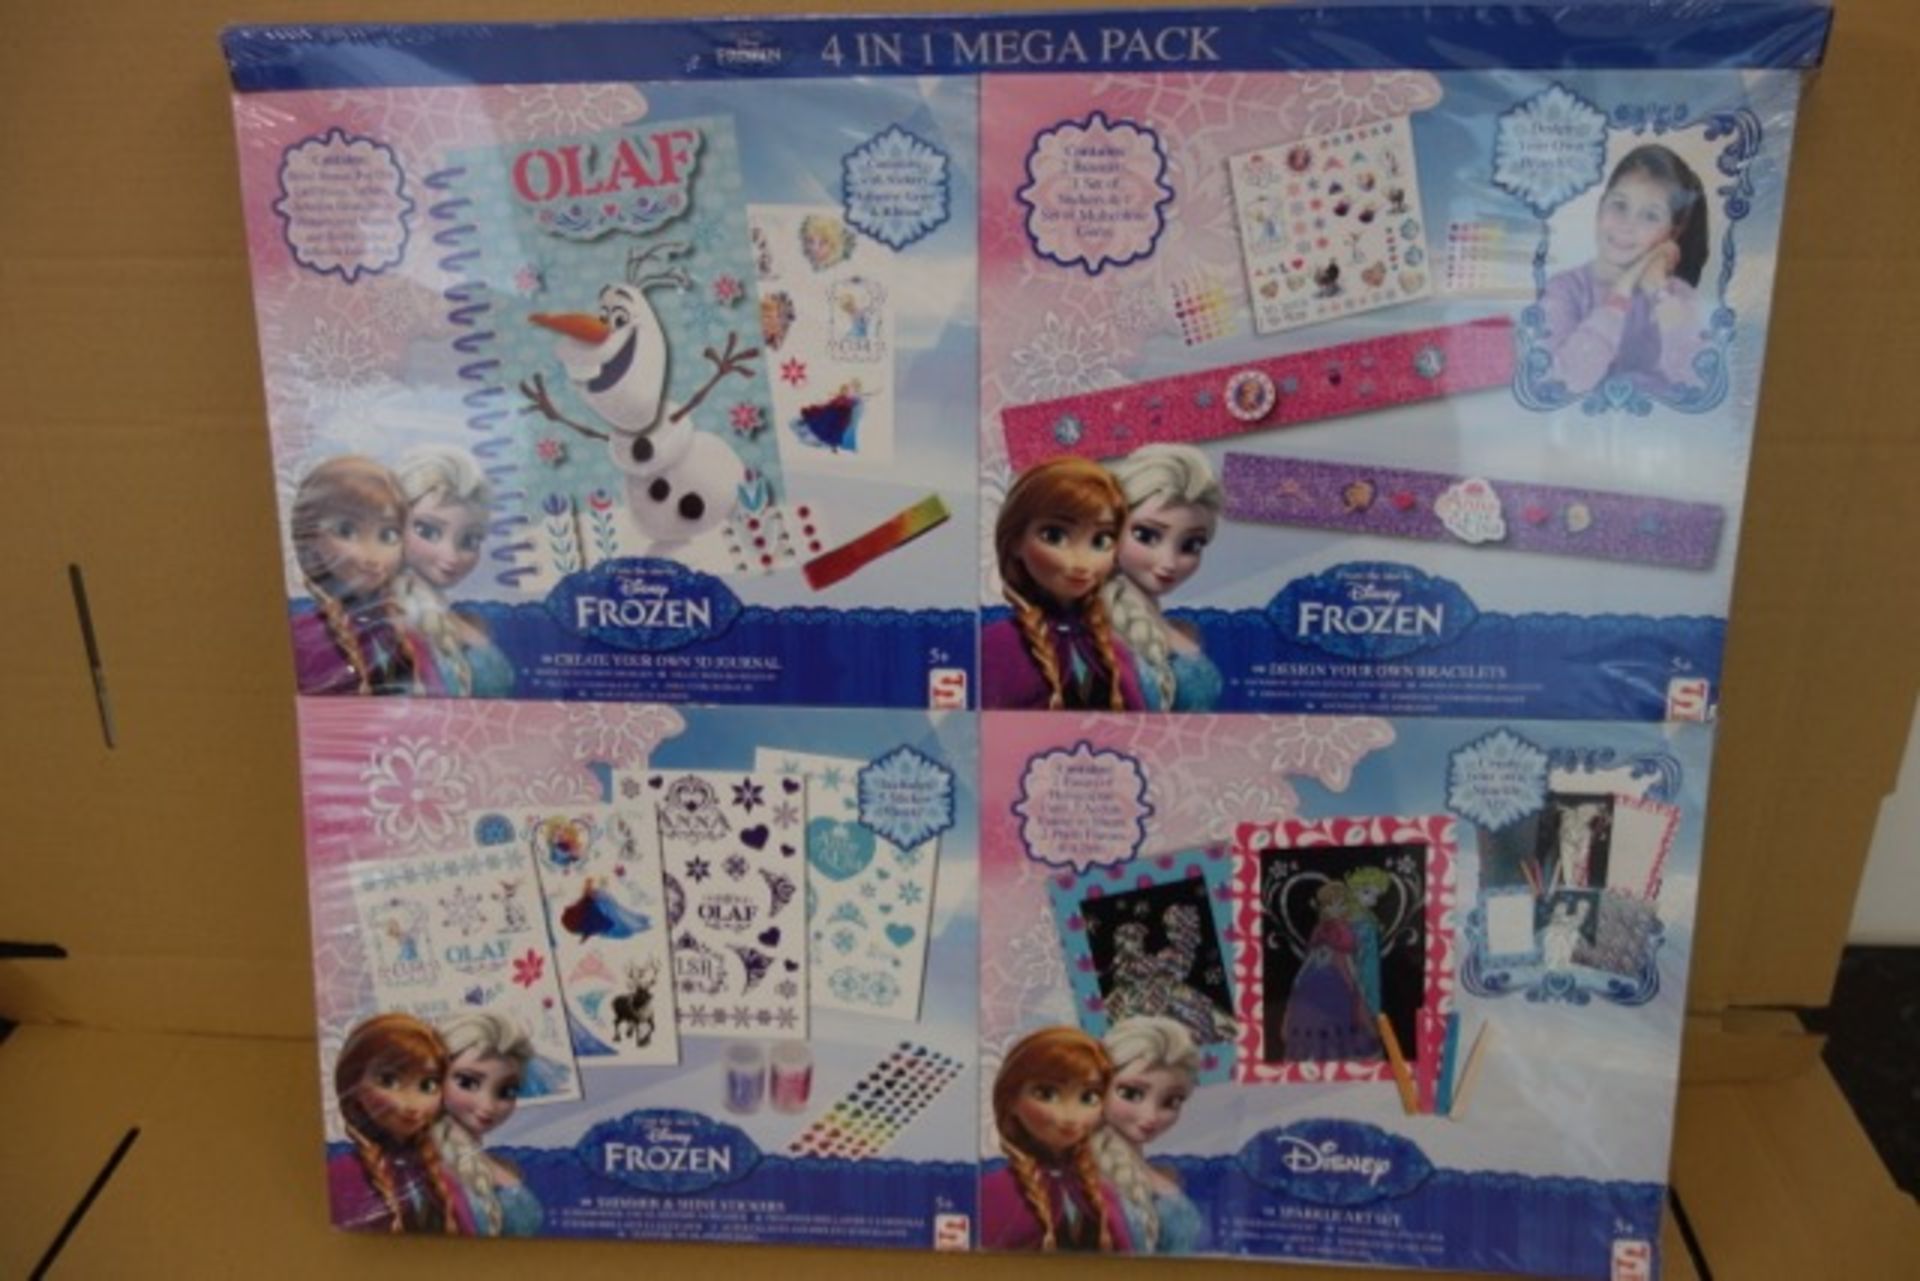 12 x Brand New Disney Frozen 4 in 1 Mega Pack. Each Includes: Create Your Own 3D Journal,